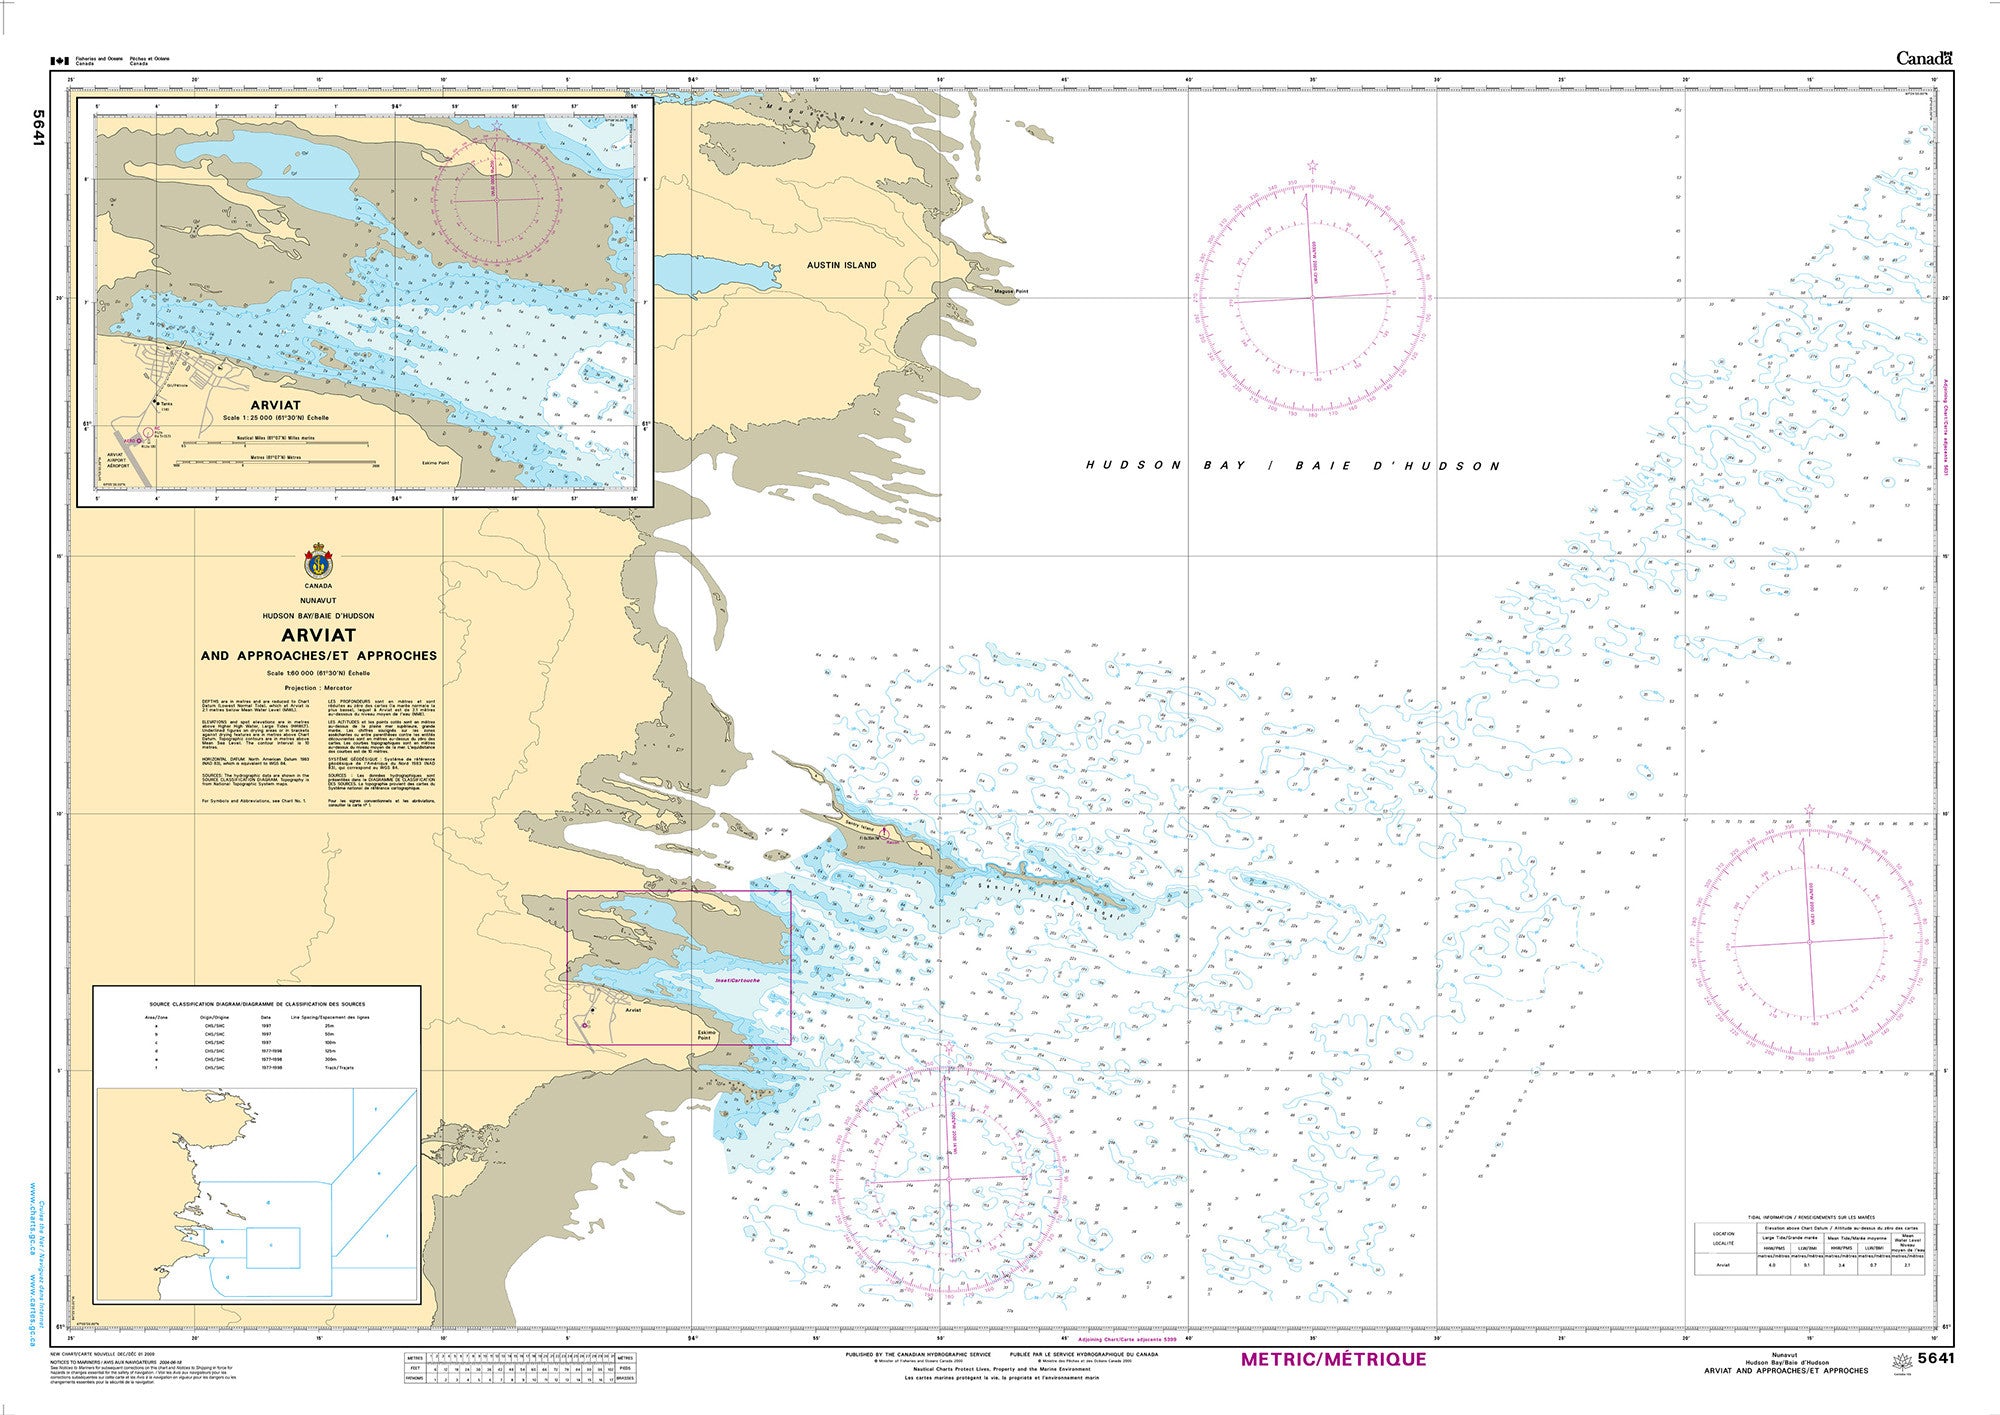 Canadian Hydrographic Service Nautical Chart CHS5641: Arviat and Approaches / et Approches